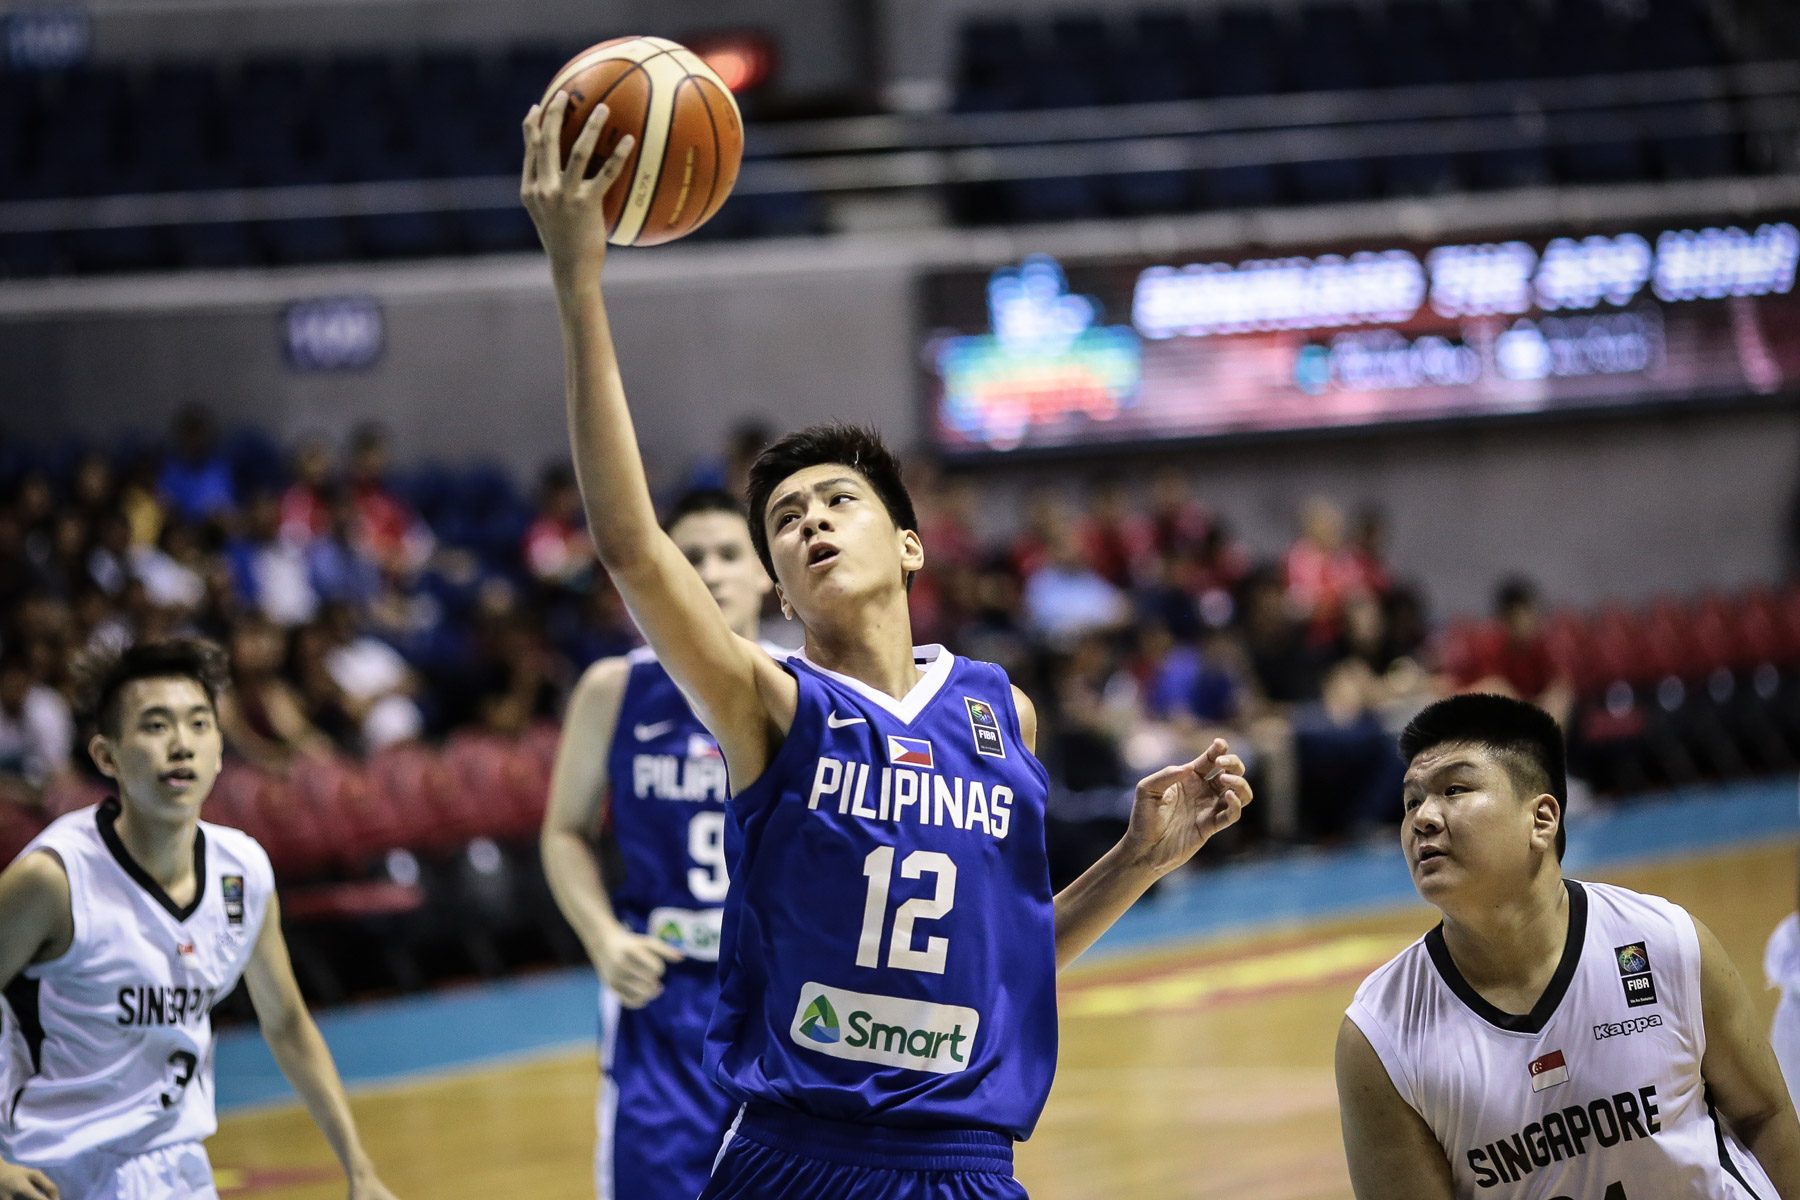 Ateneo’s Kai Sotto drops 11-block TD in Finals Game 1 rout of NU Bullpups